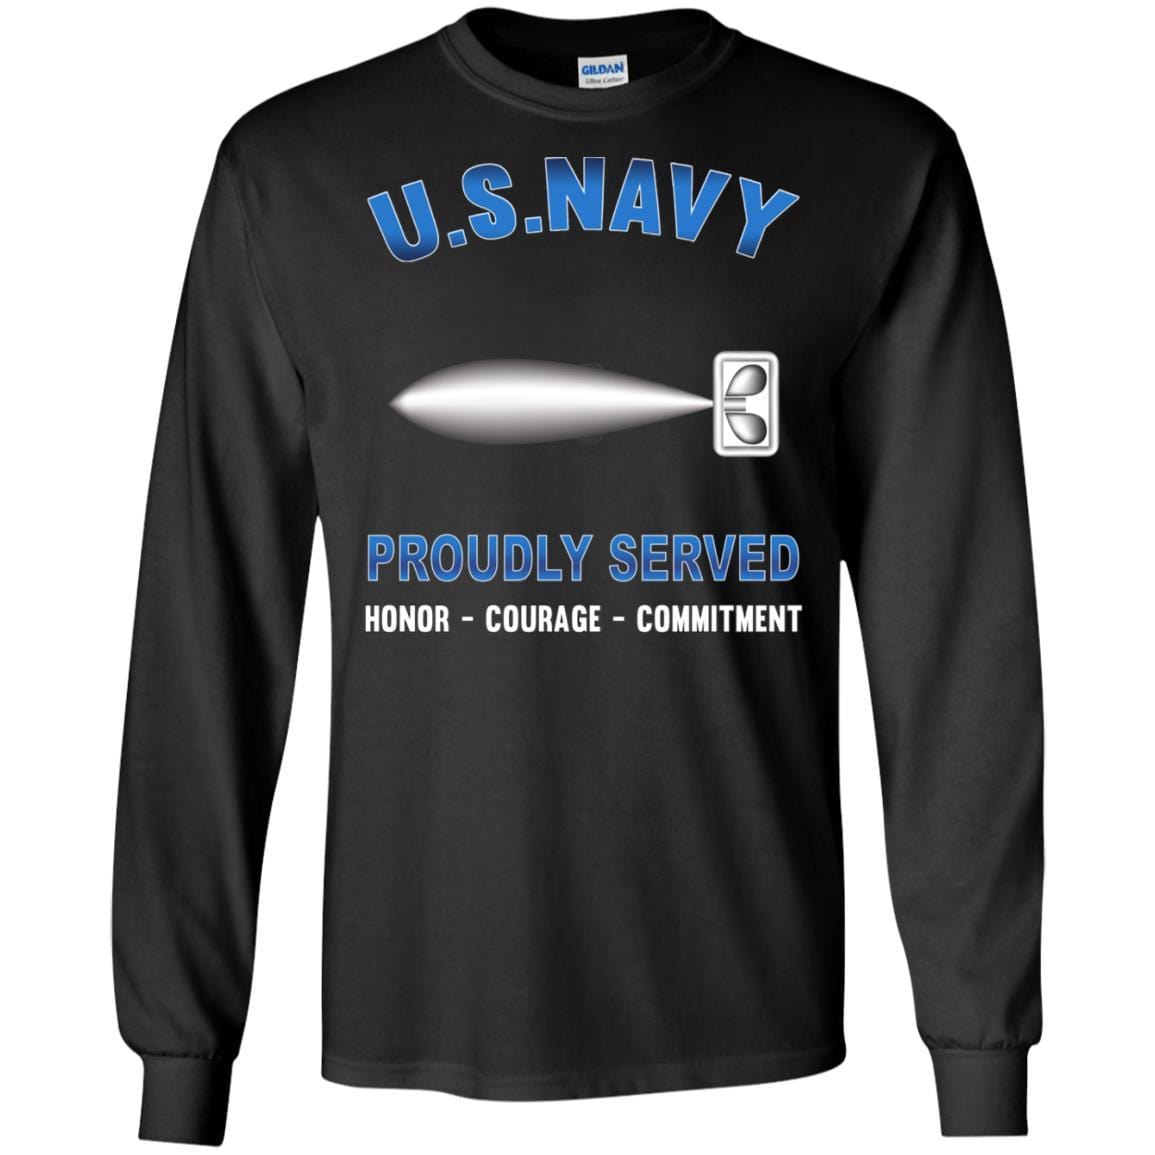 U.S Navy Torpedoman's mate Navy TM - Proudly Served T-Shirt For Men On Front-TShirt-Navy-Veterans Nation